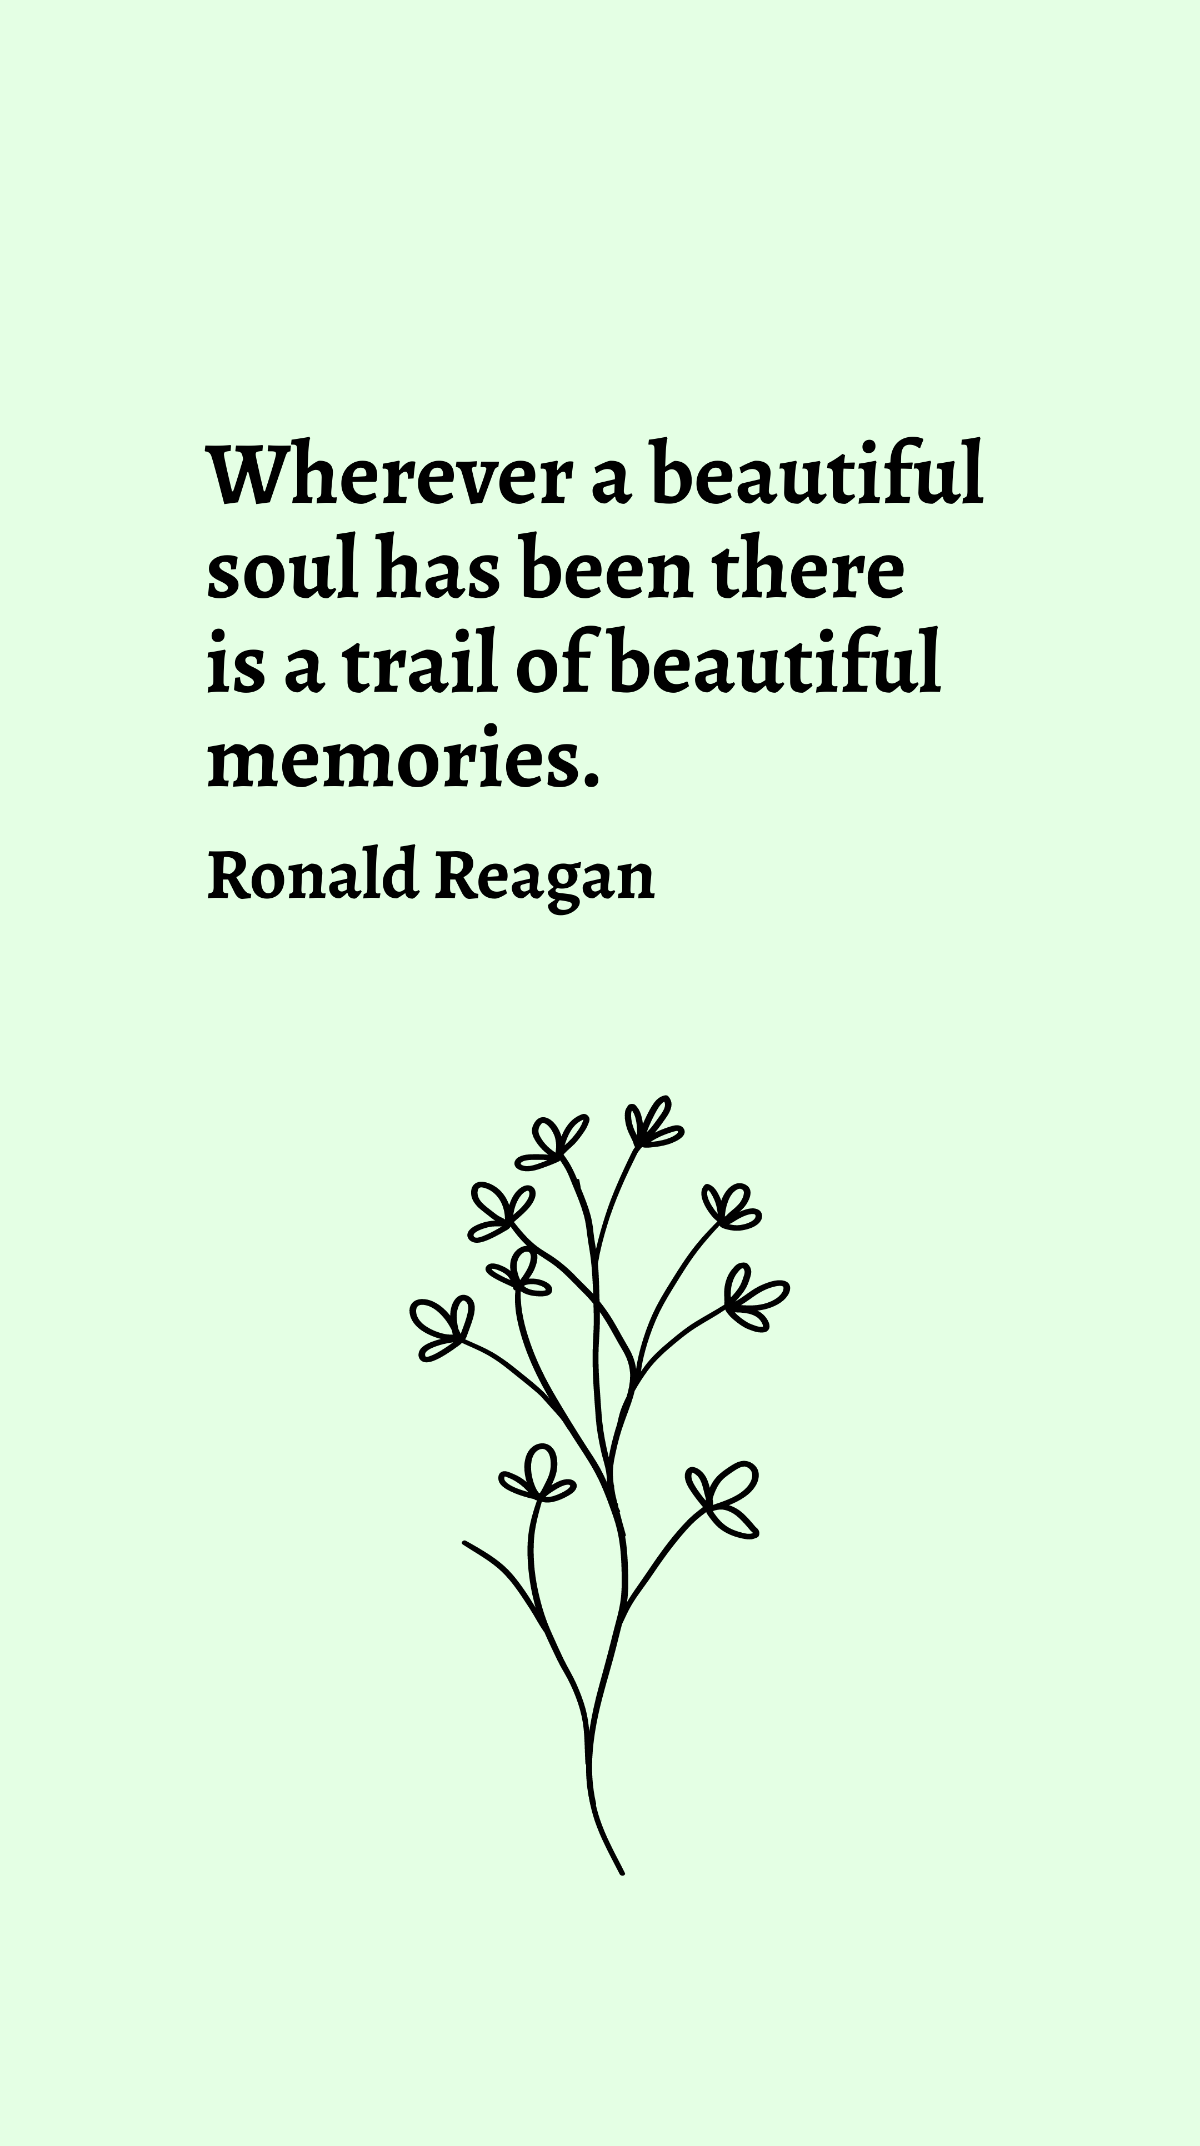 Free Ronald Reagan - Wherever a beautiful soul has been there is a trail of beautiful memories. Template